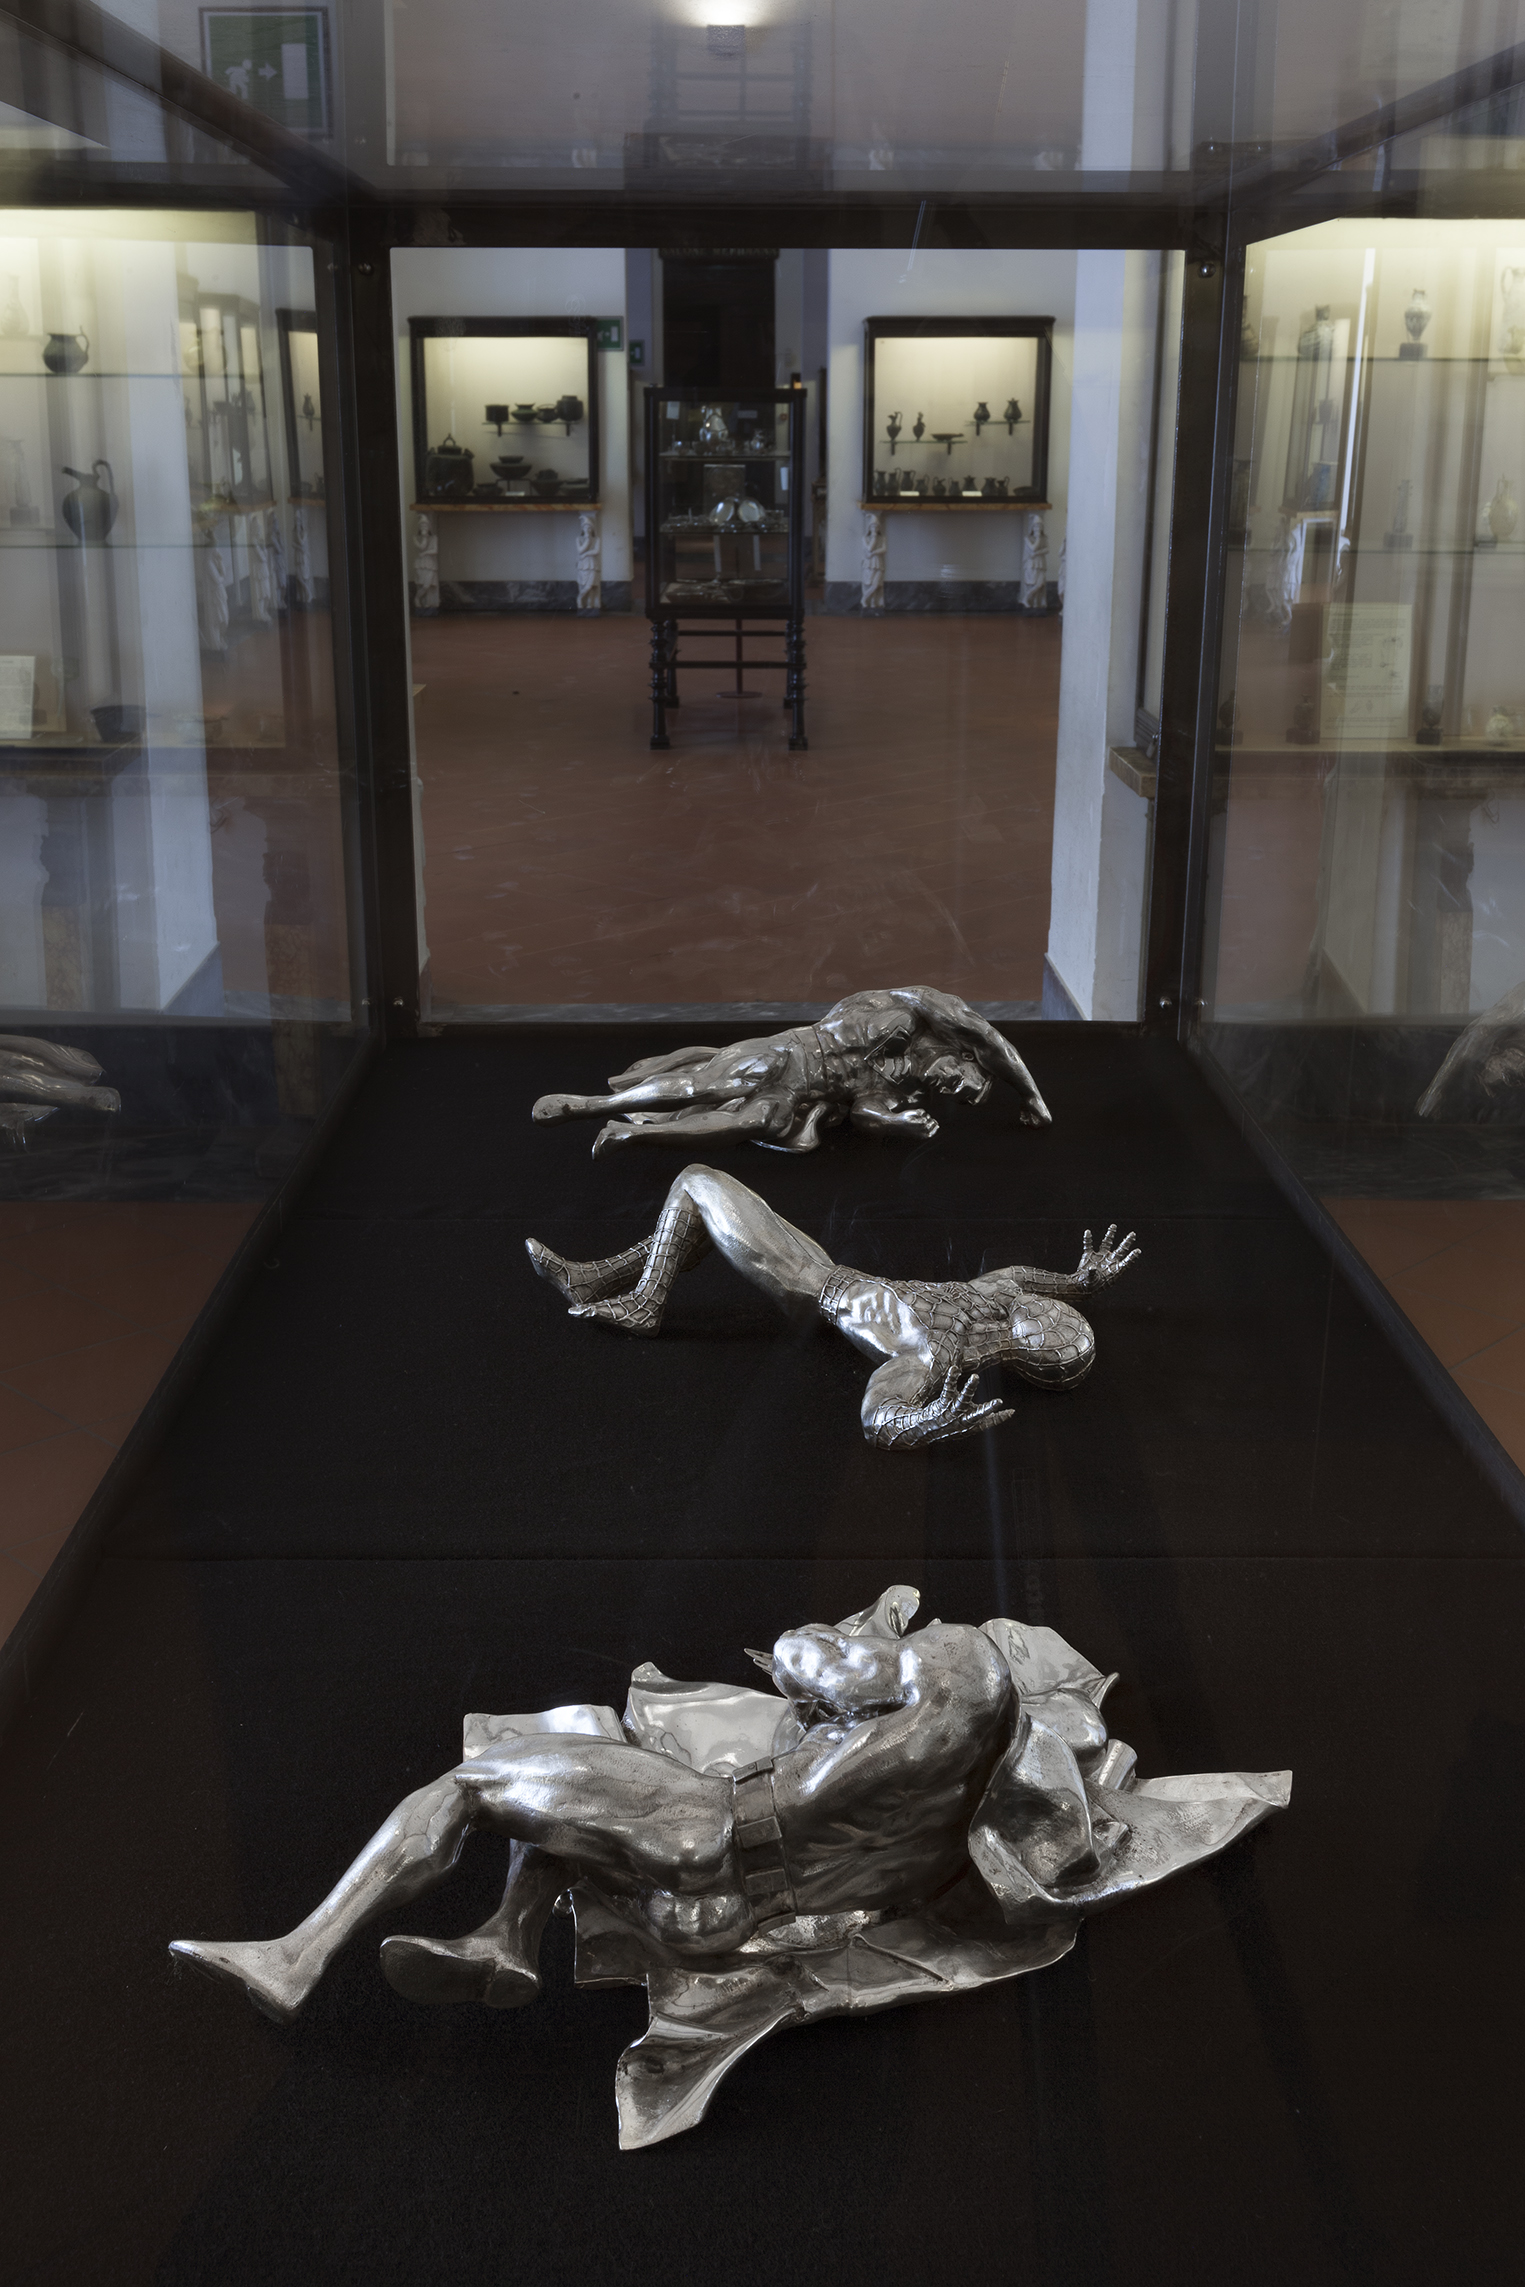    The Age of Chance , 2005 . MANN - Museo Archeologico Nazionale di Napoli, Naples 2016. Installation view. Photo: Claudio Abate 